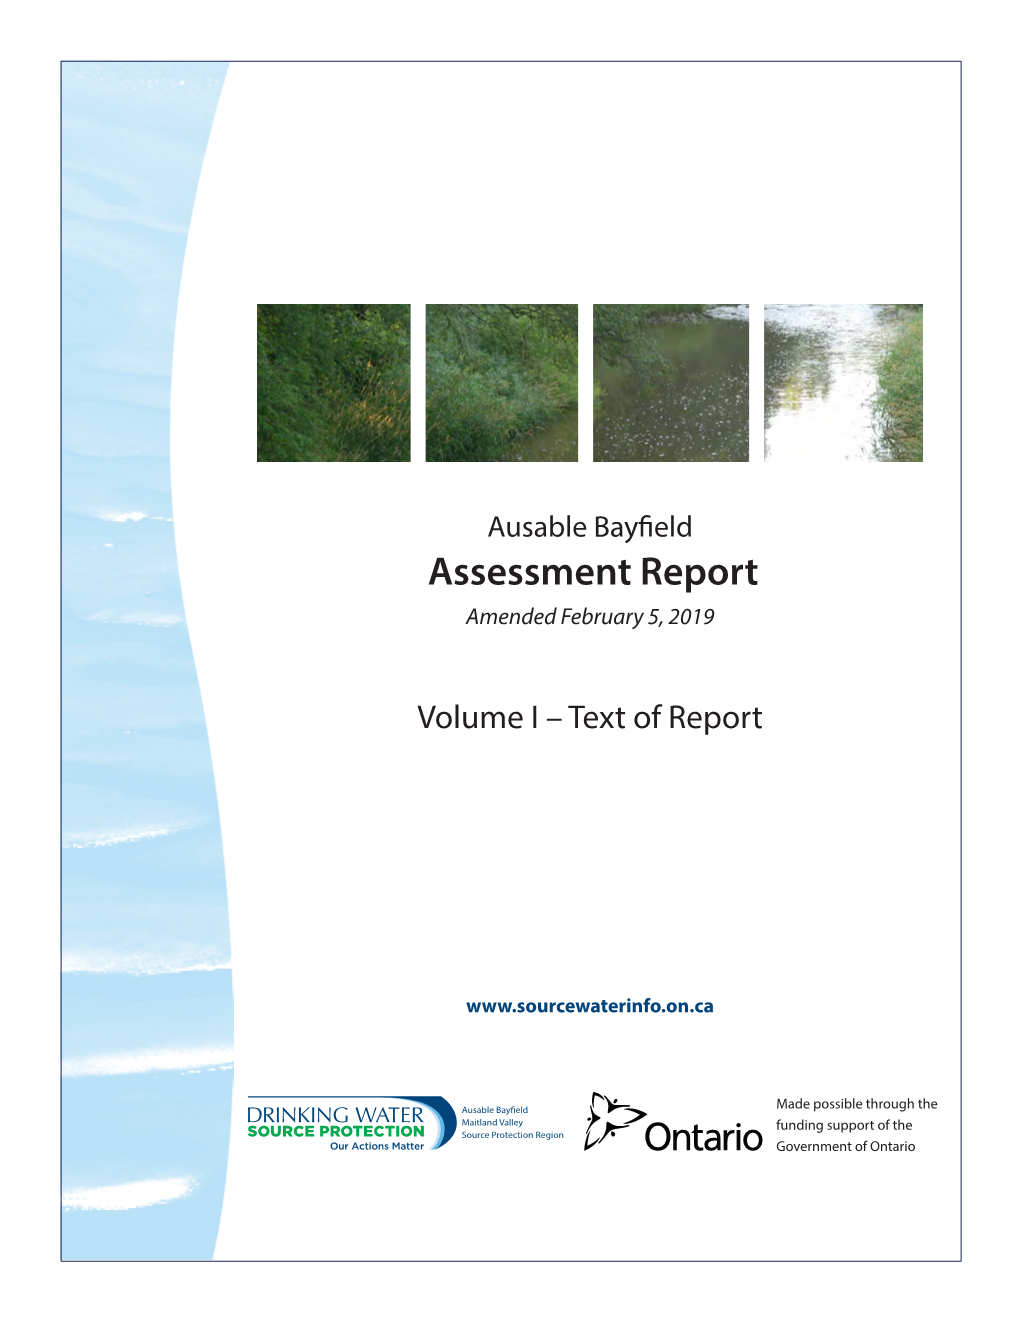 Ausable Bayfield Assessment Report Amended February 5, 2019